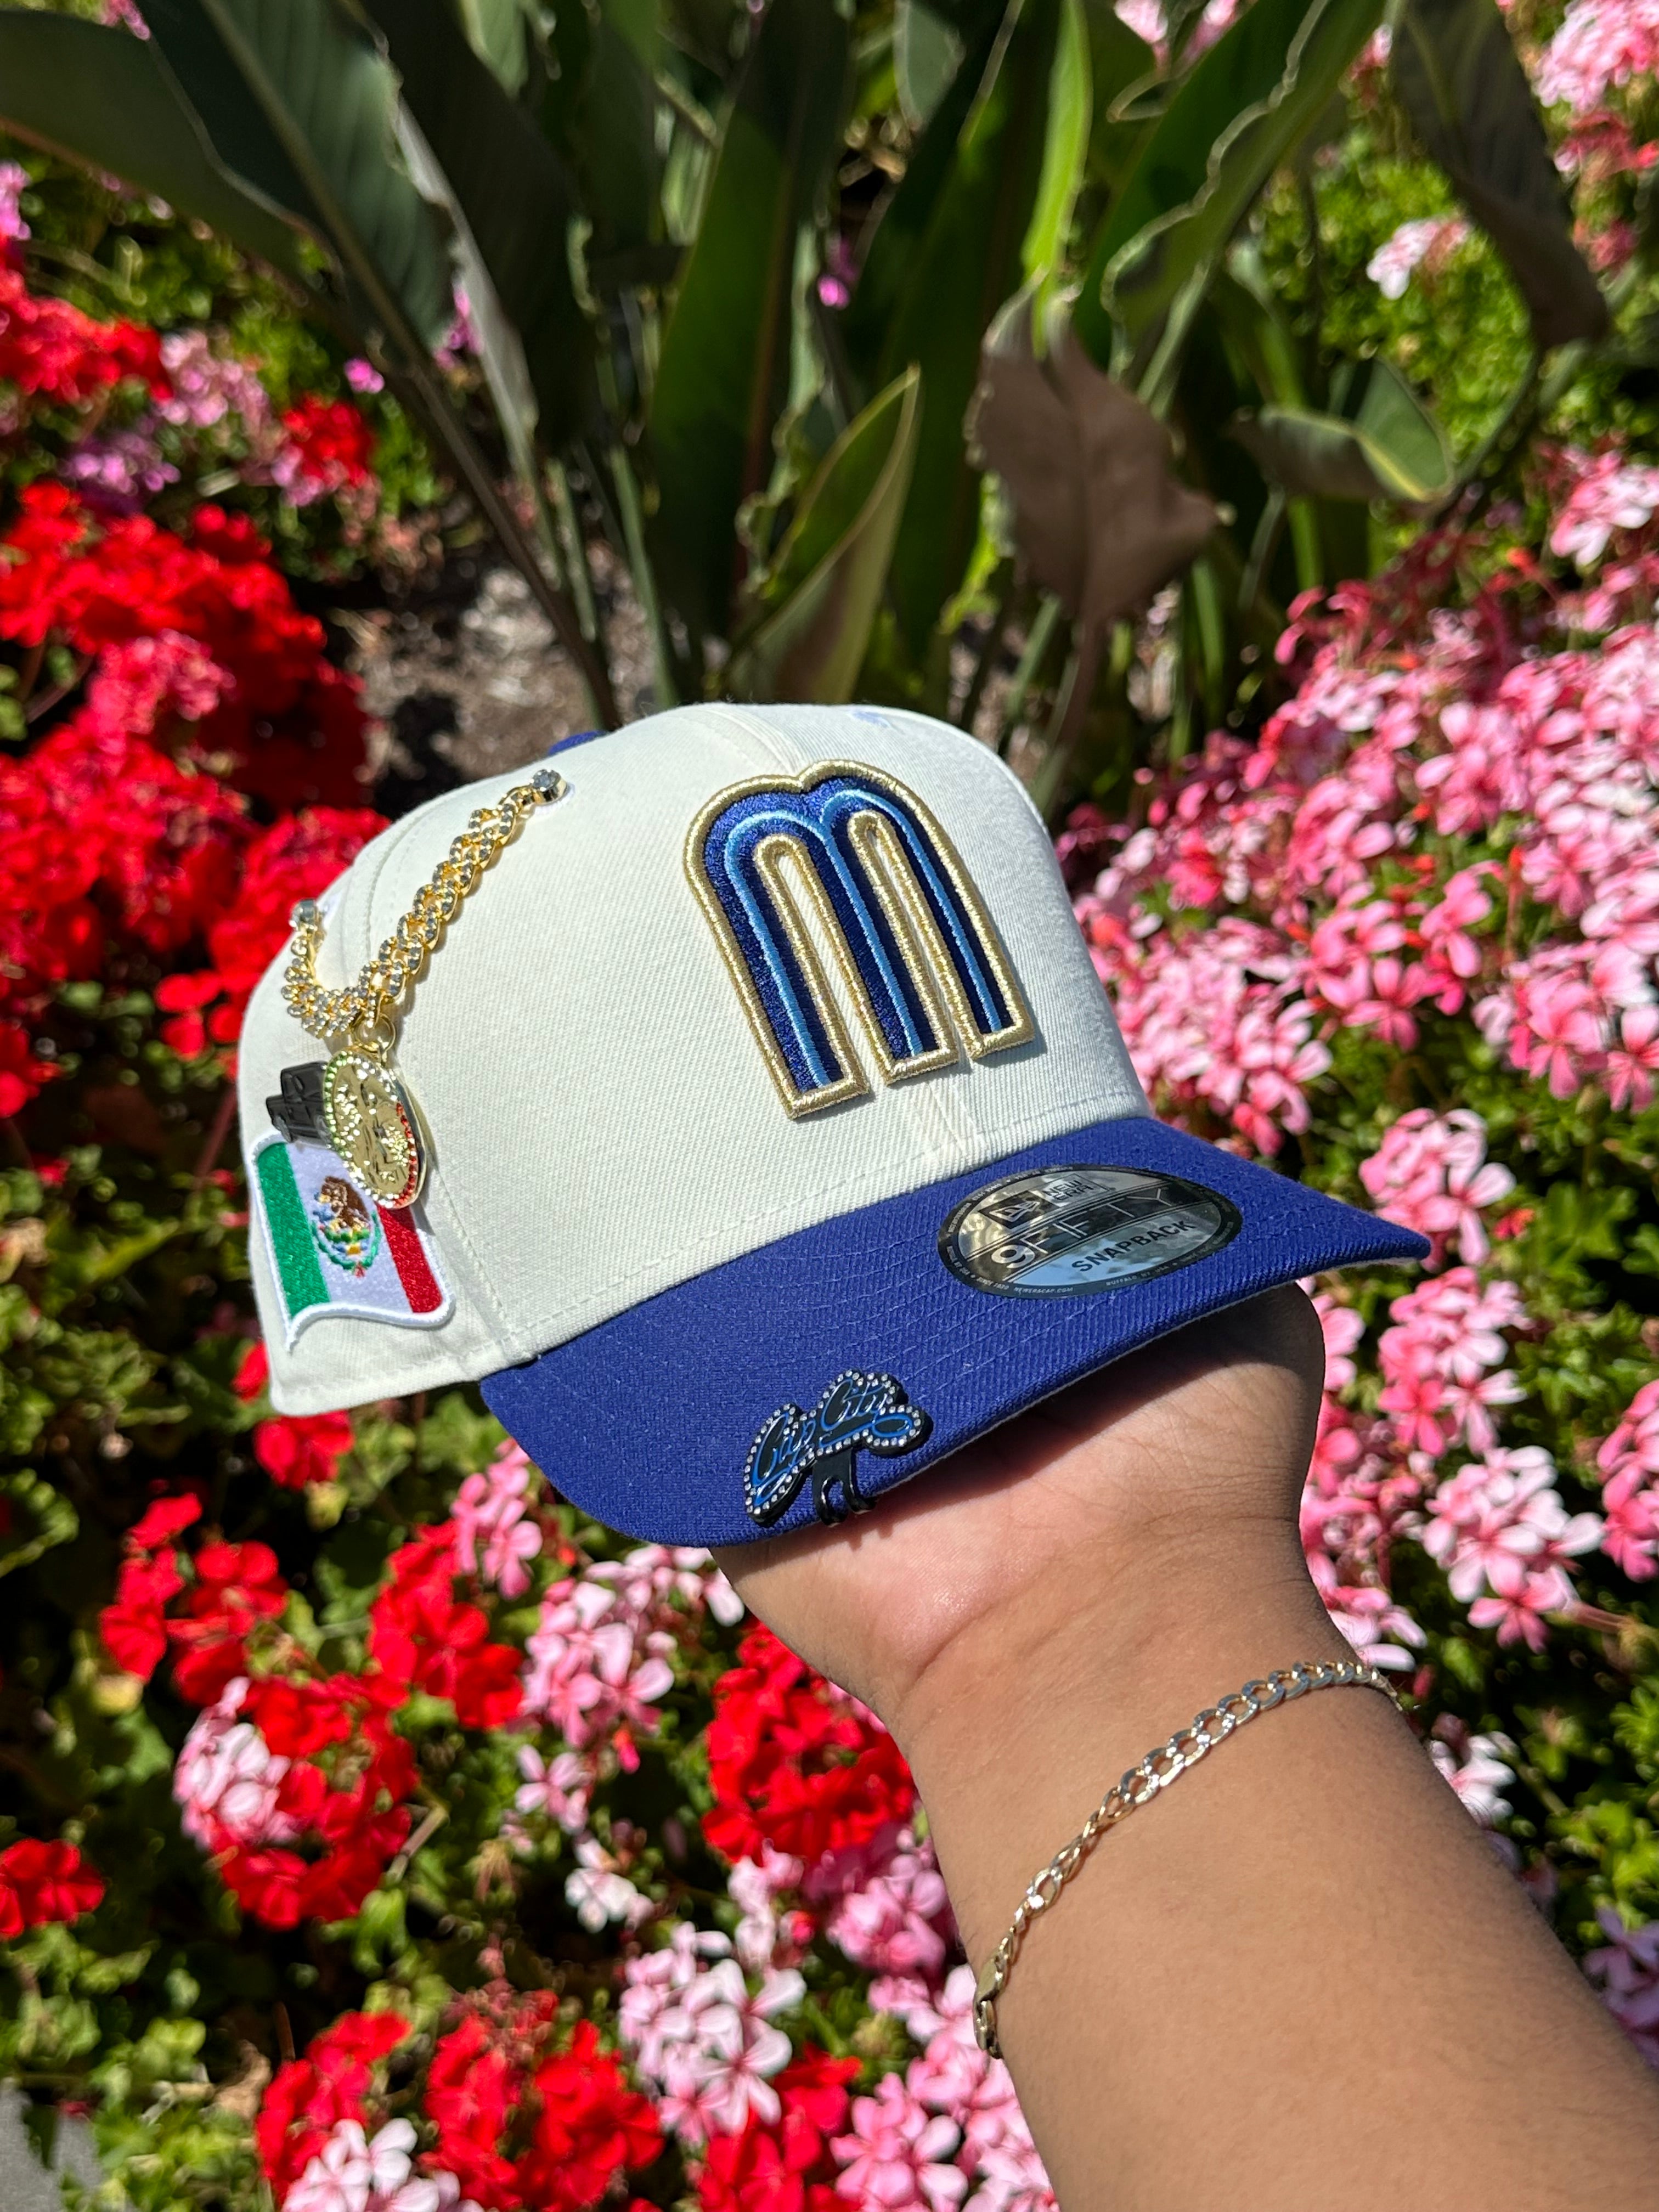 NEW ERA EXCLUSIVE 9FIFTY CHROME WHITE/BLUE MEXICO SNAPBACK W/ MEXICO FLAG SIDE PATCH